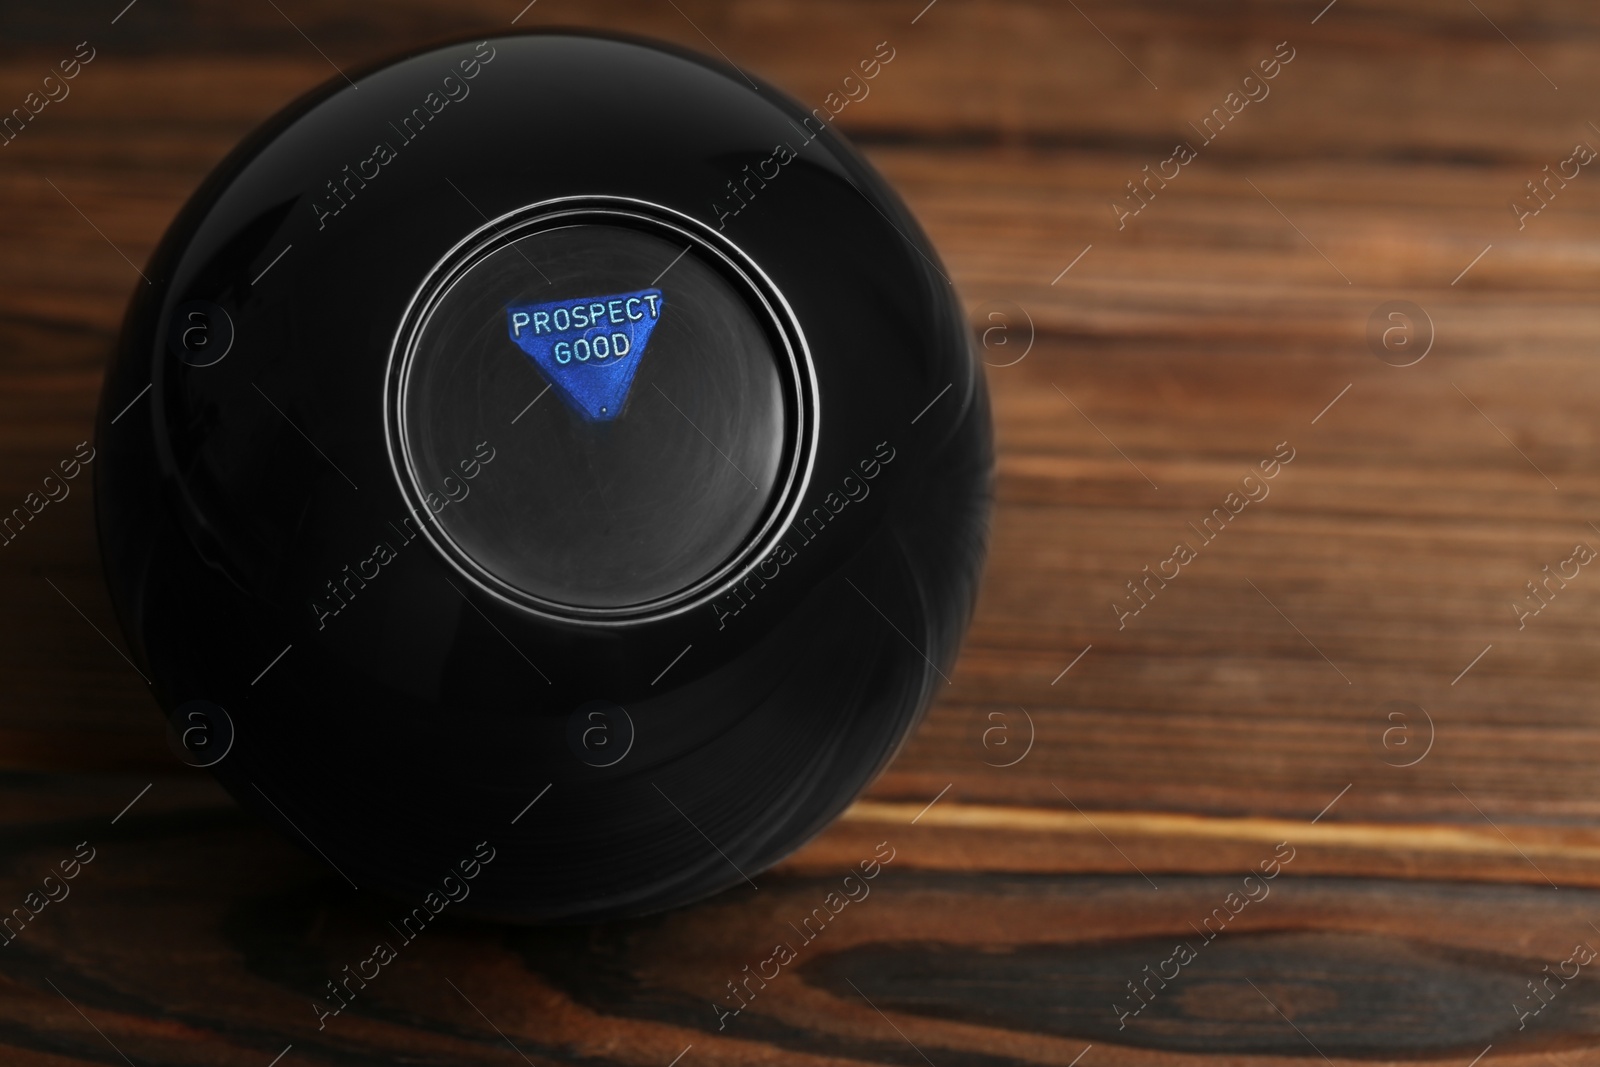 Photo of Magic eight ball with prediction Prospect Good on wooden table, space for text